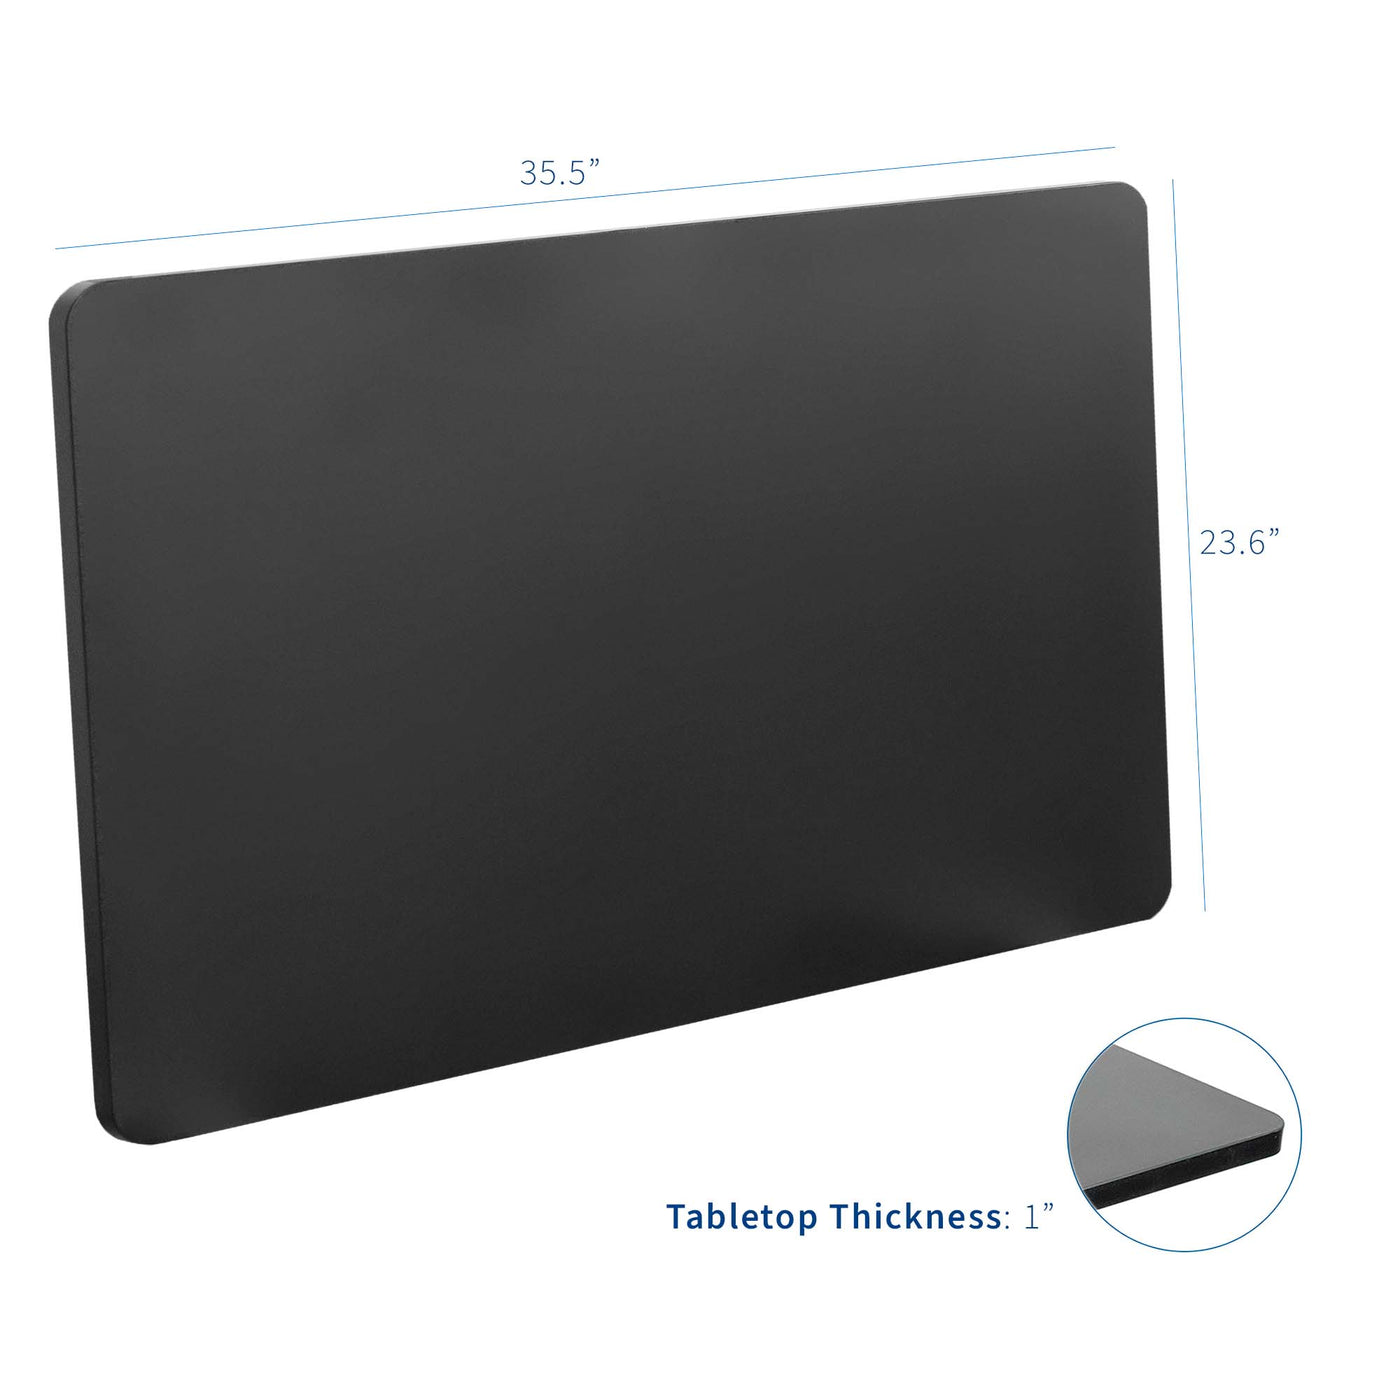 Dimensions of space-efficient table tops that are one inch thick.